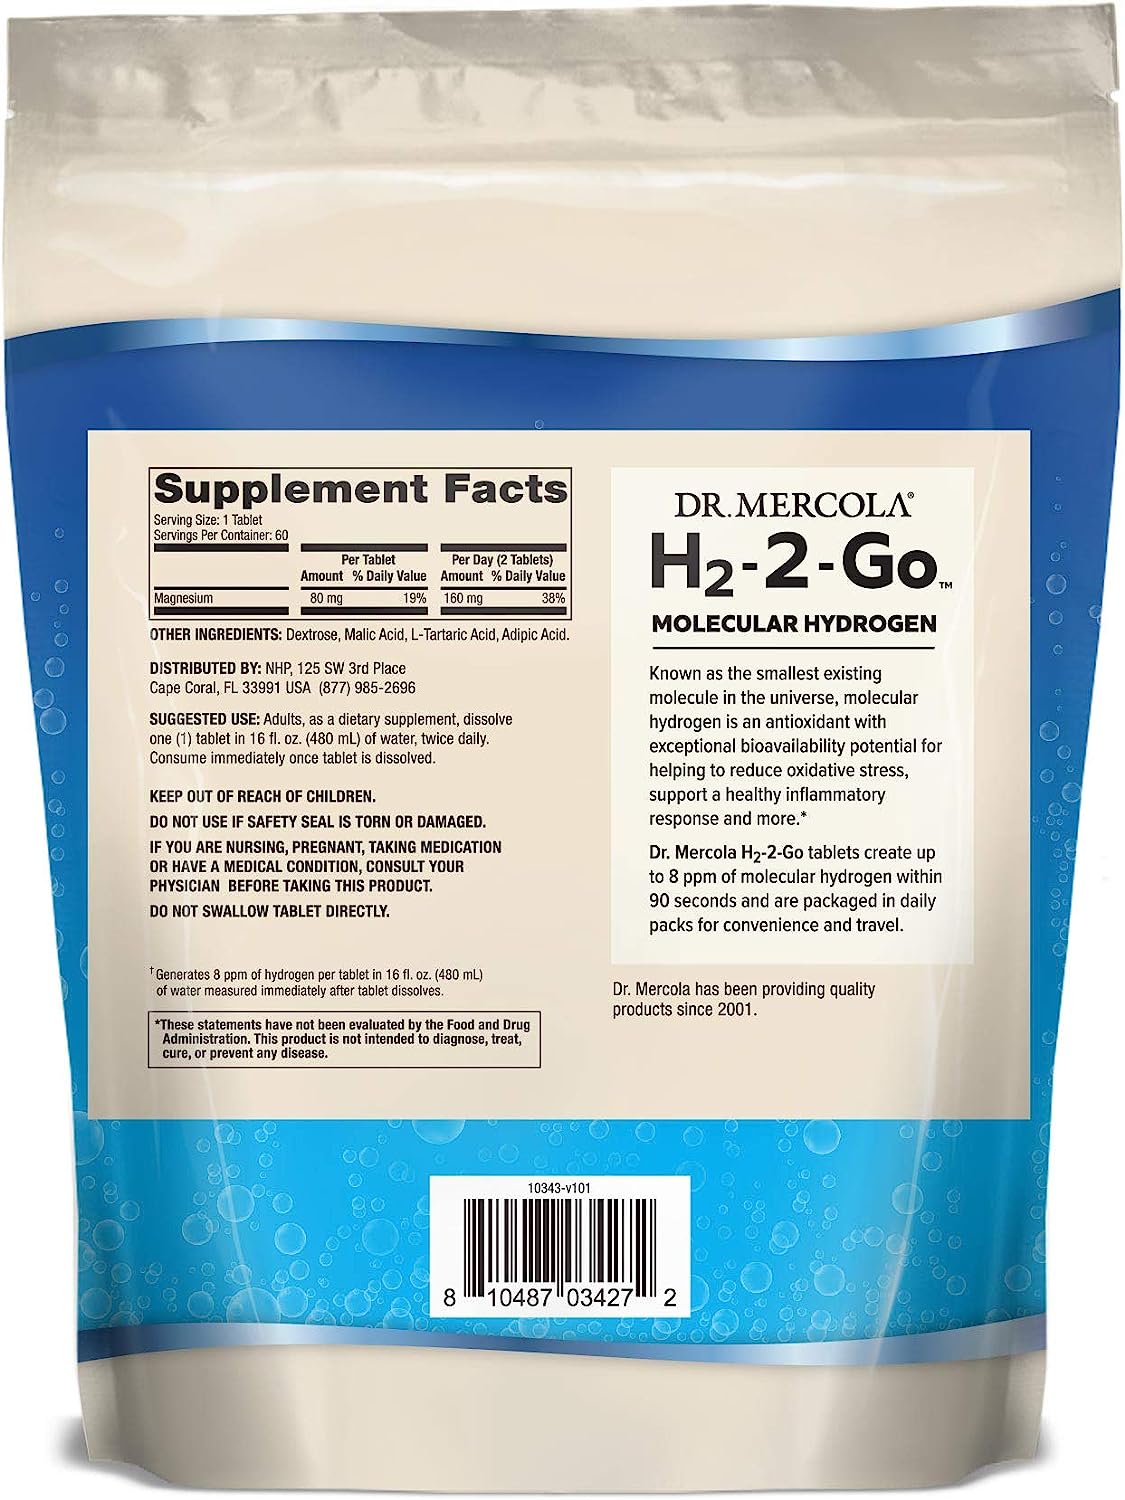 Dr. Mercola H2-2-Go Packets, Up to 8ppm of Molecular Hydrogen Gas*, non GMO, Gluten Free, Soy Free - image 2 of 3